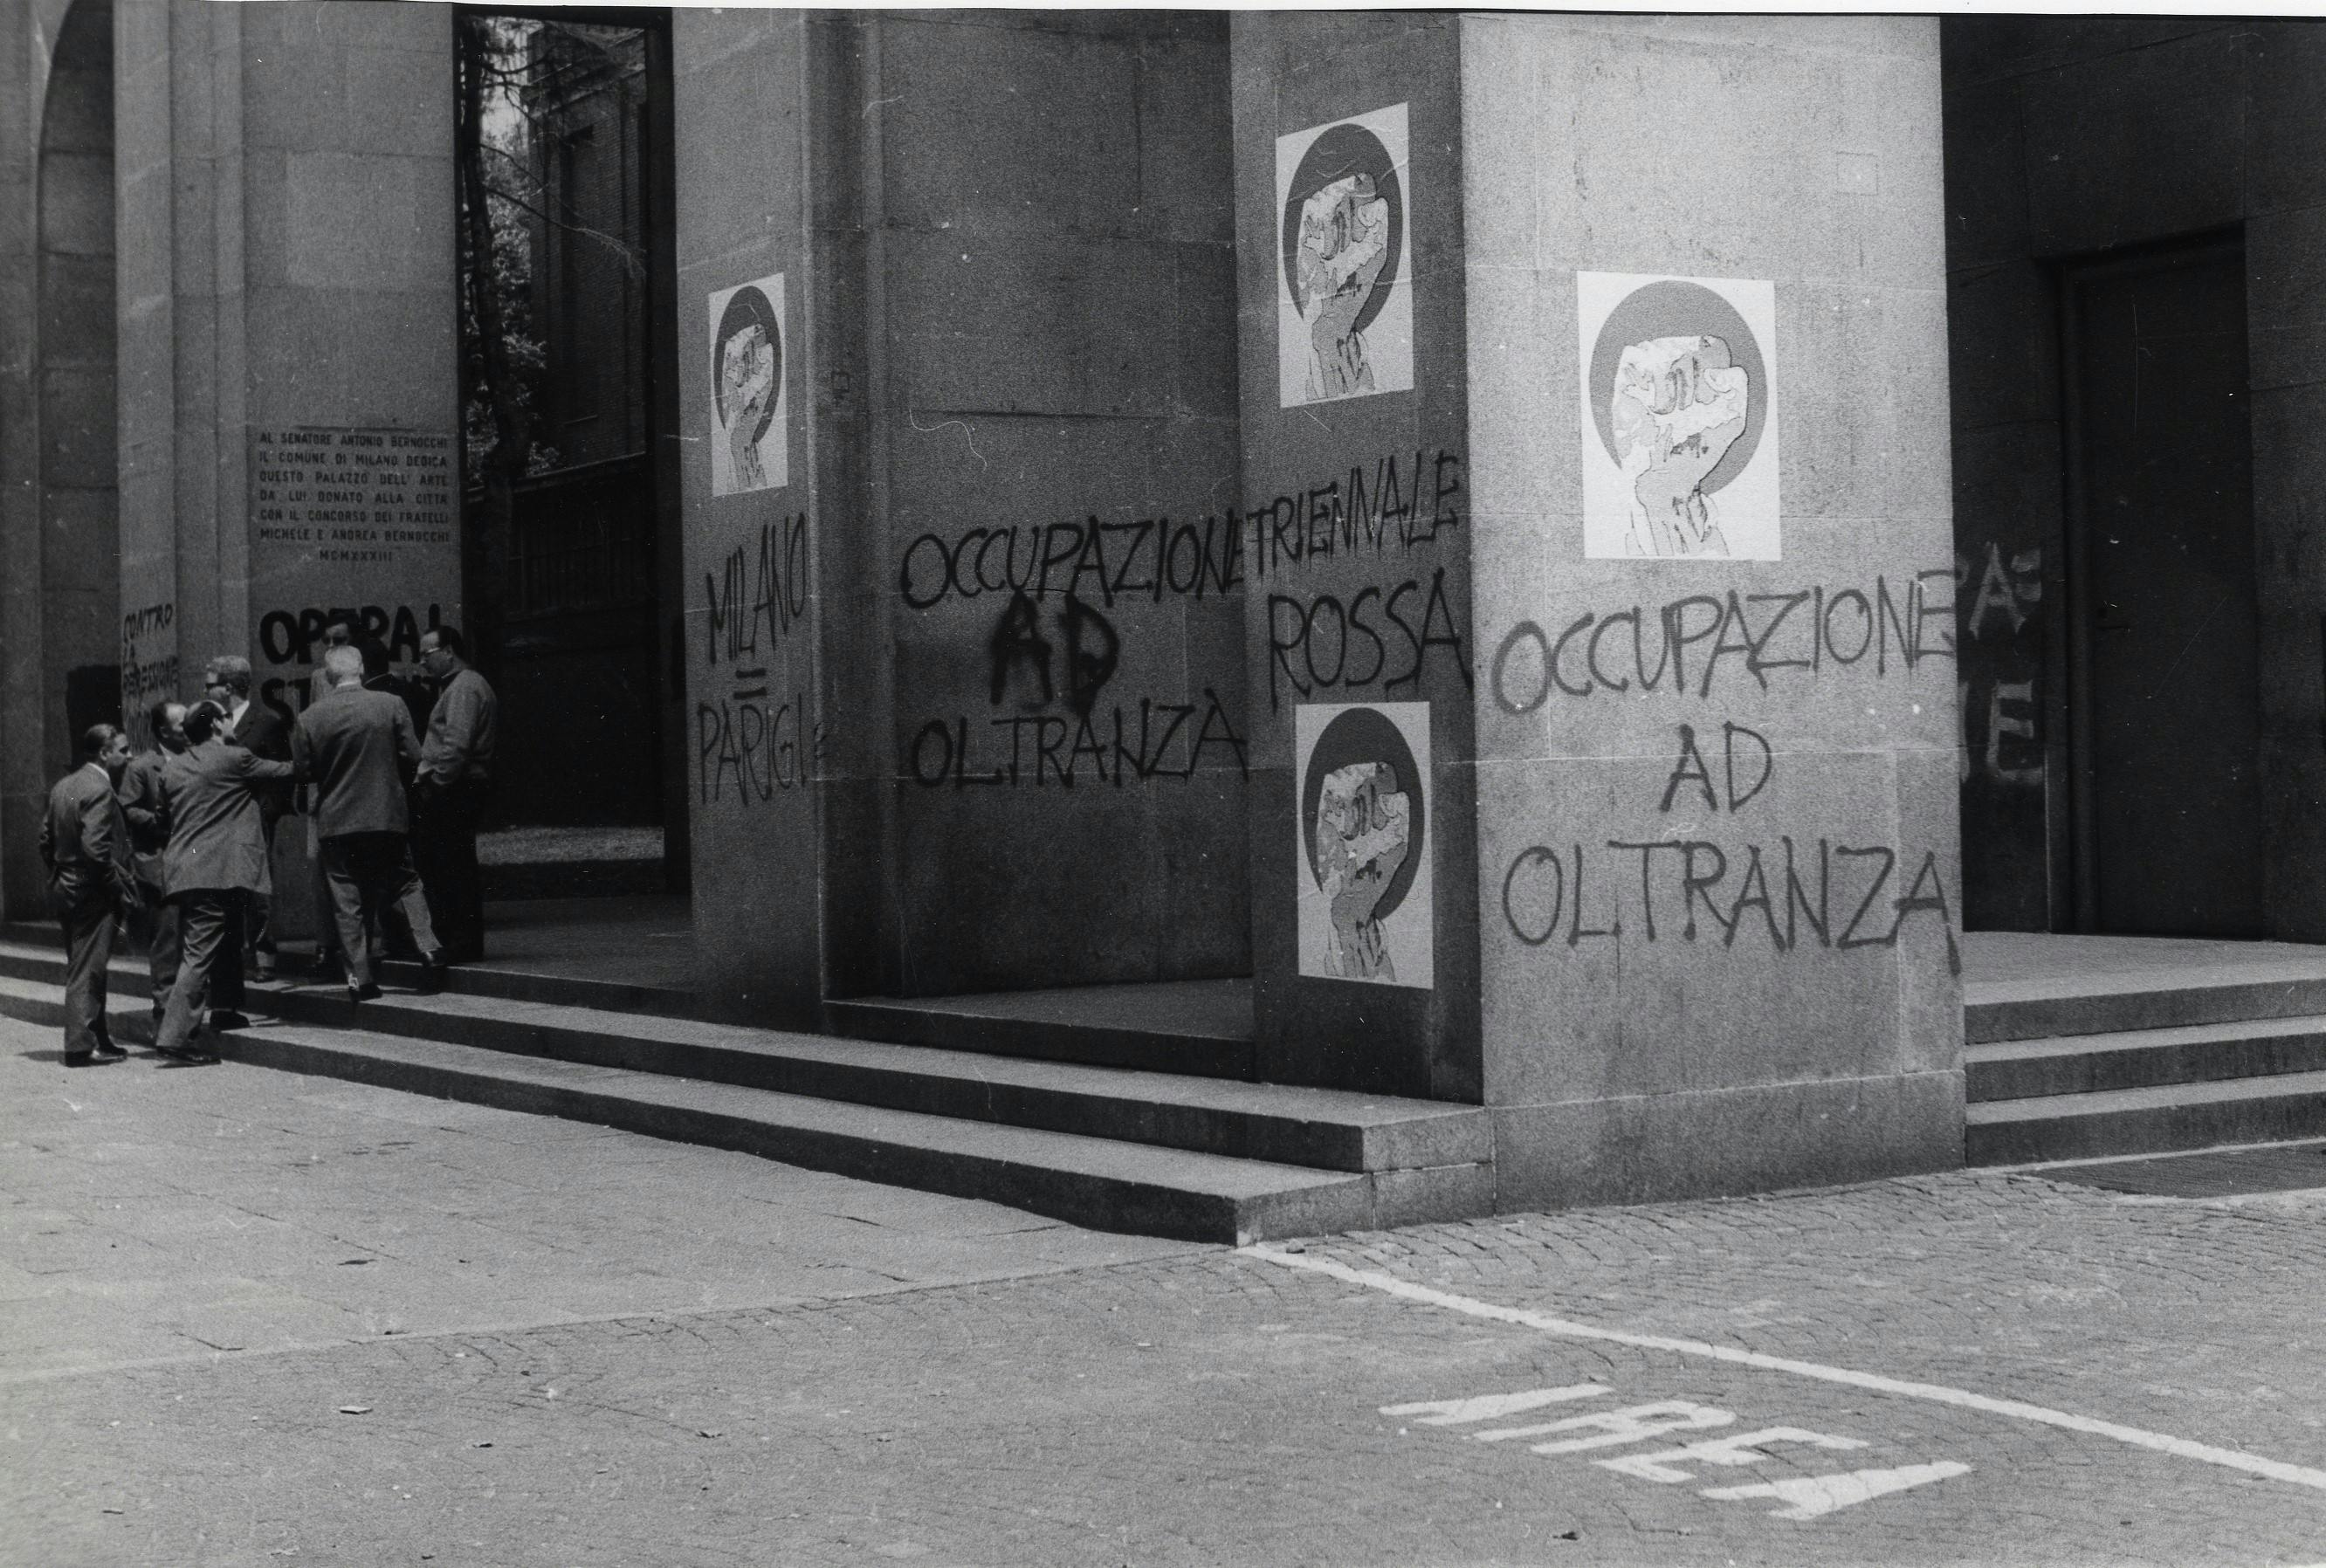 1968: Protests at the opening of the 14th Triennale